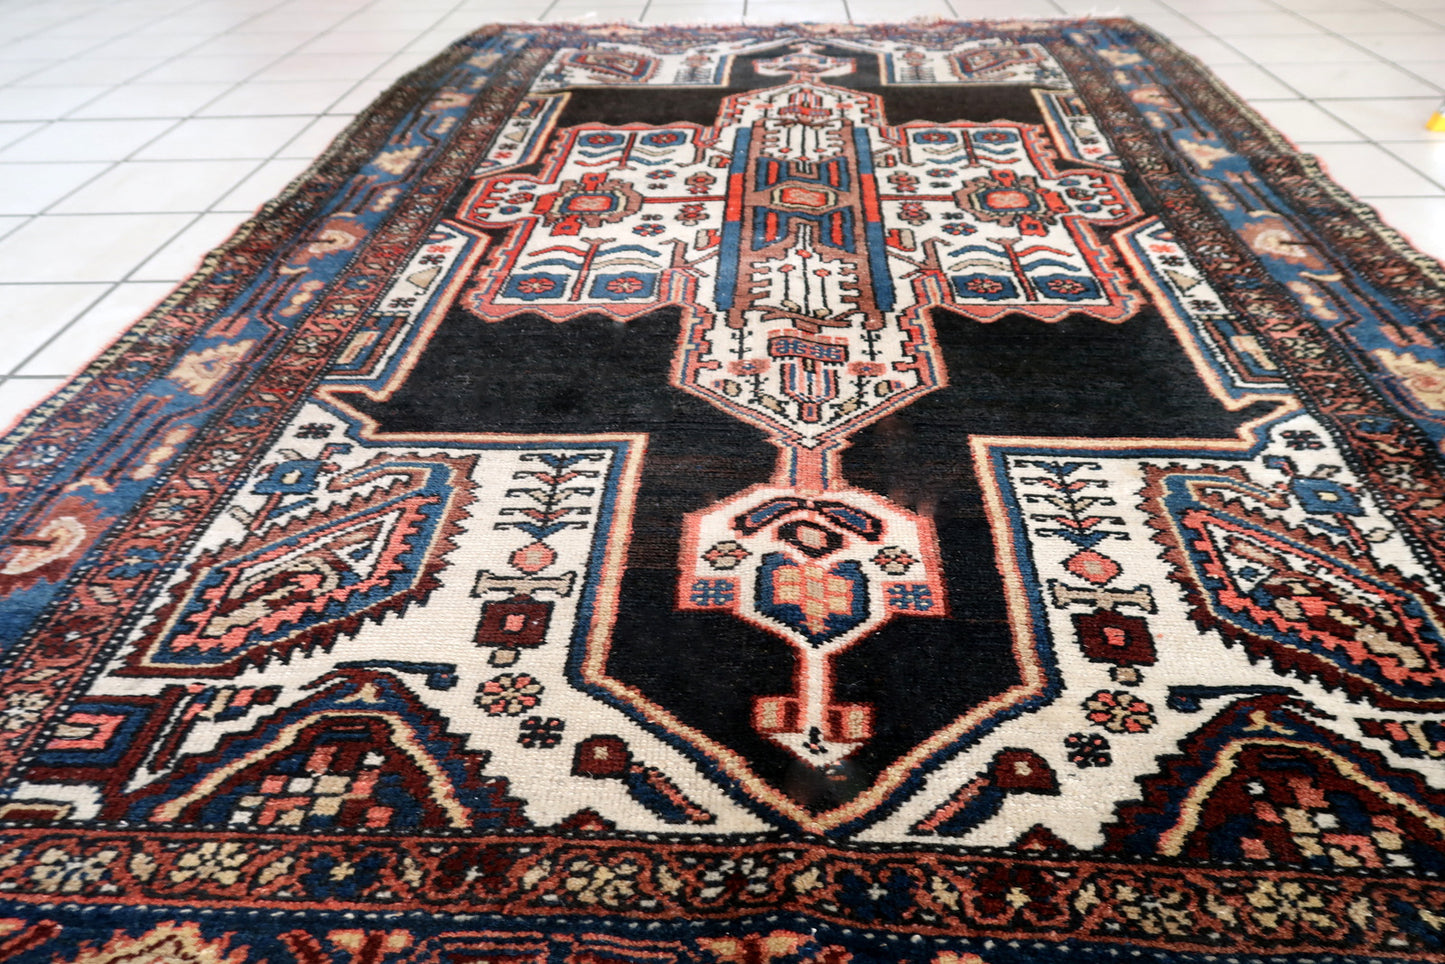 Handmade antique Persian Malayer rug in black and white colors. The rug is from the beginning of 20th century in original condition, it has some low pile.